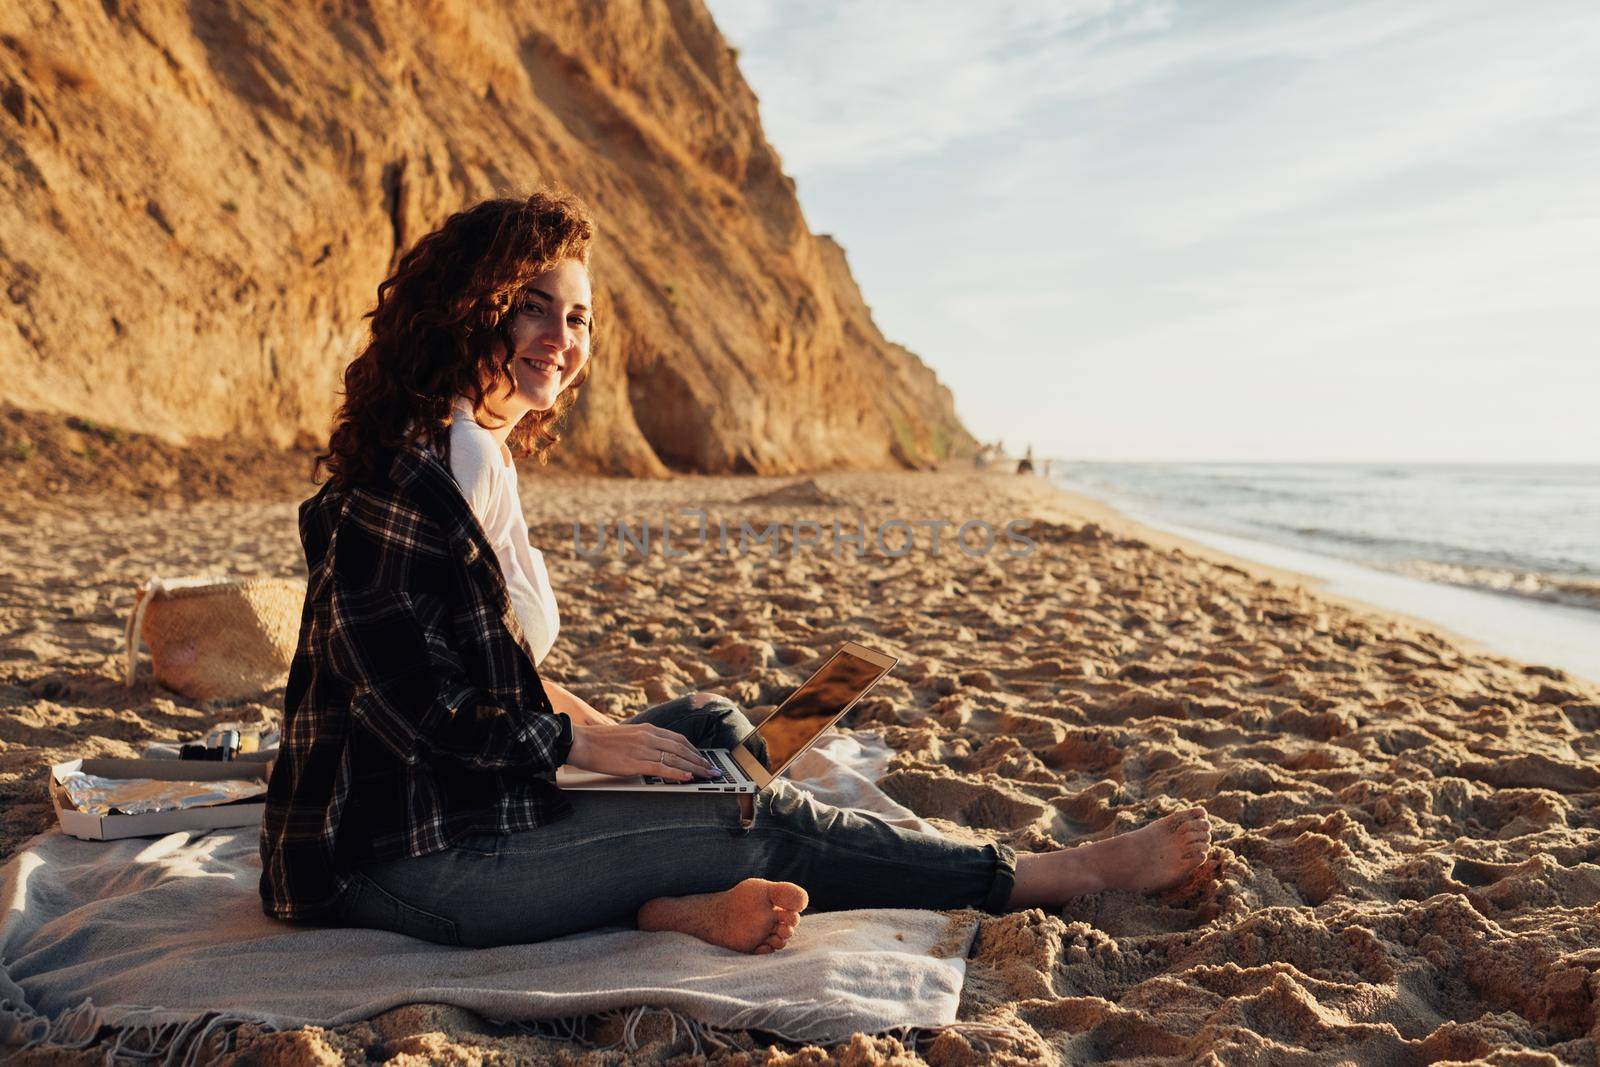 Curly haired woman working on laptop while sitting on the seashore at dawn with beautiful coastline on background